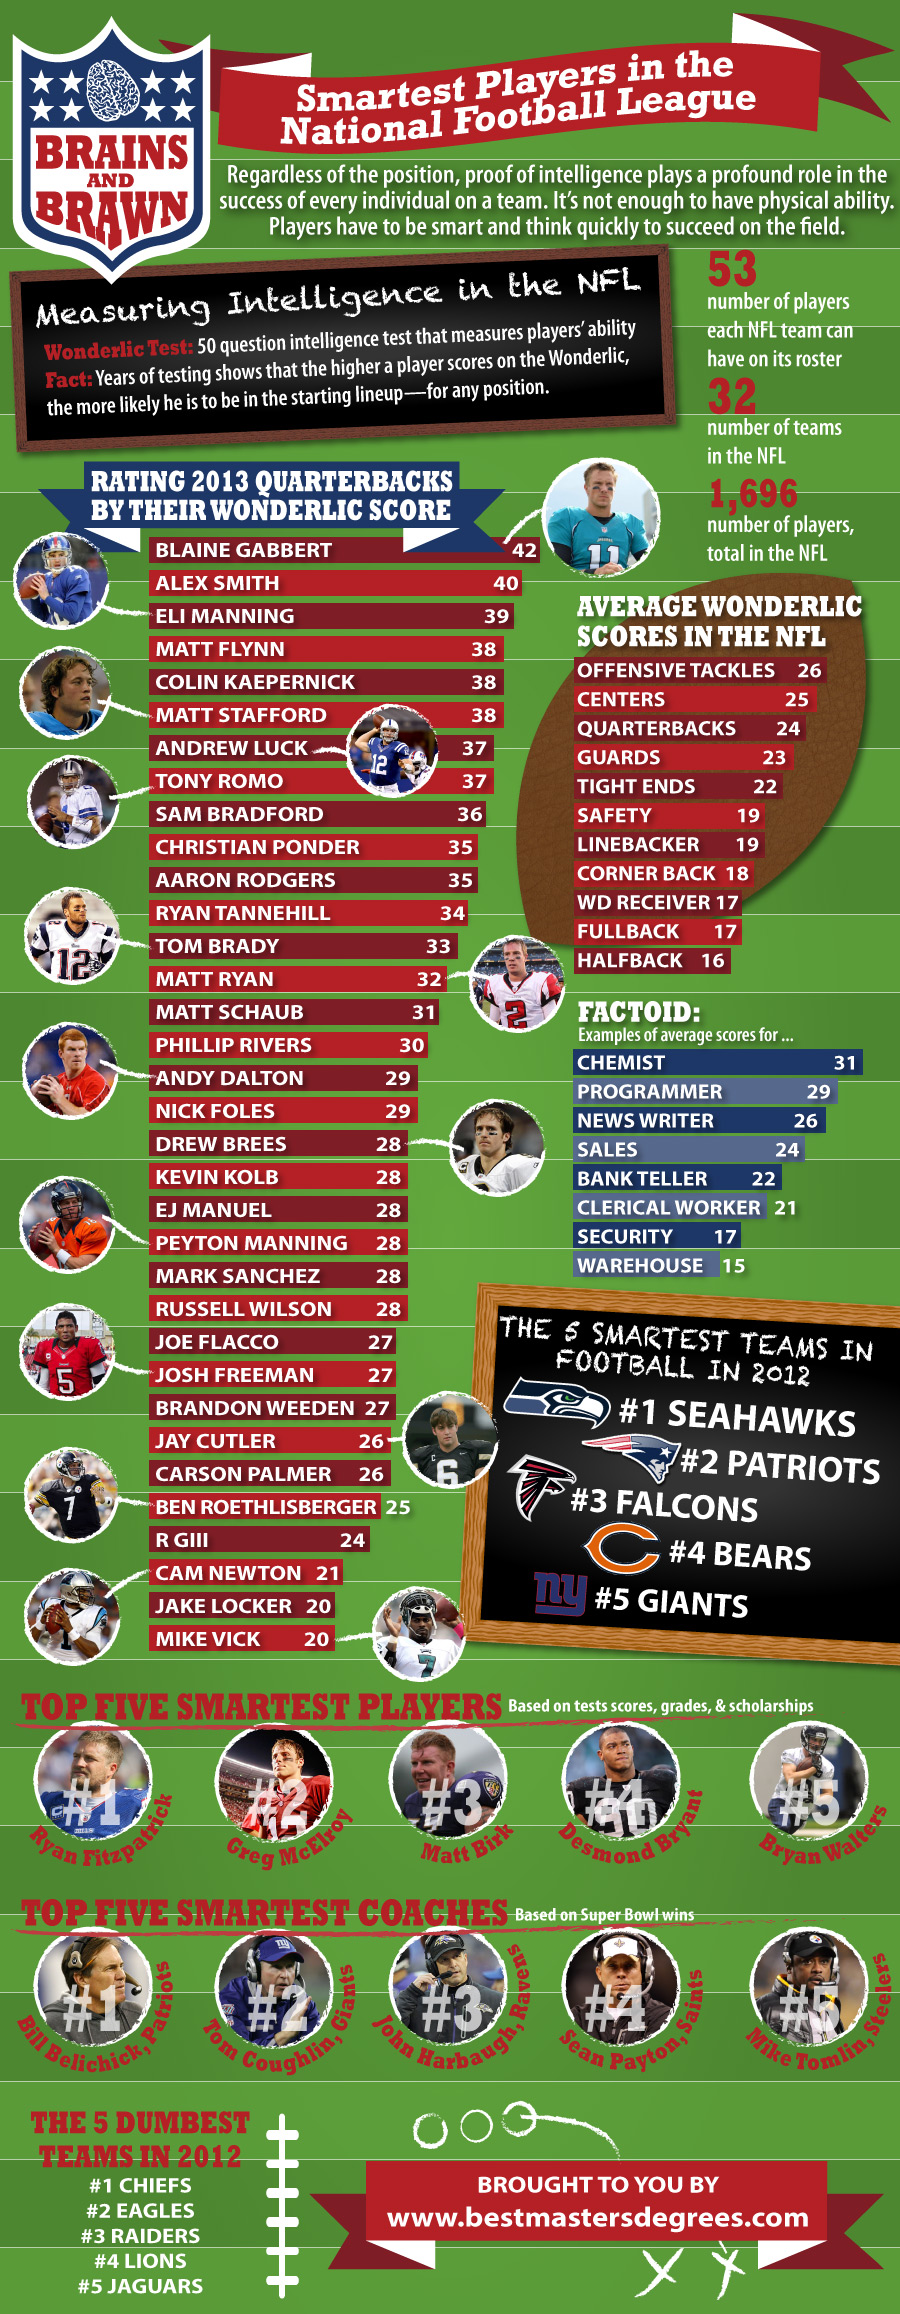 Brains and Brawn: Smartest Players in the NFL